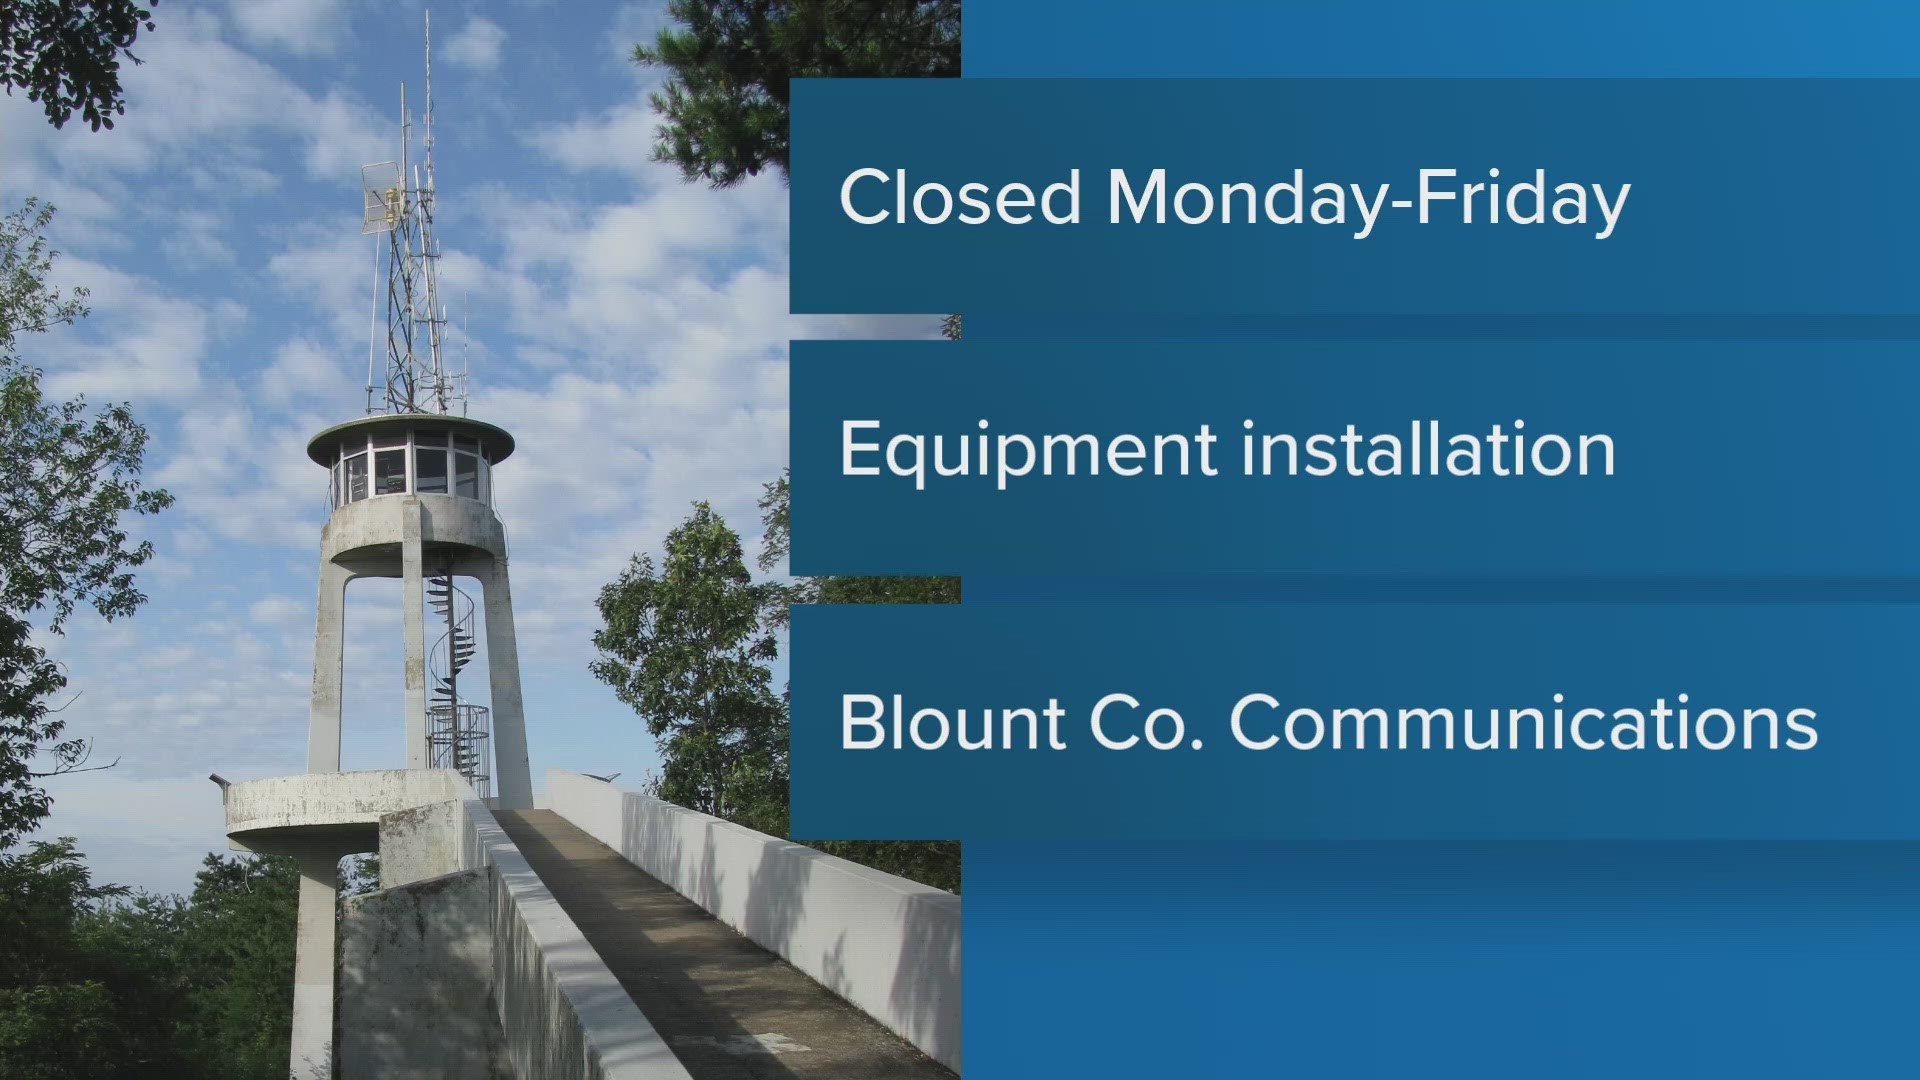 Motorola will be at the tower installing more microwave equipment for Blount County Emergency Communications.